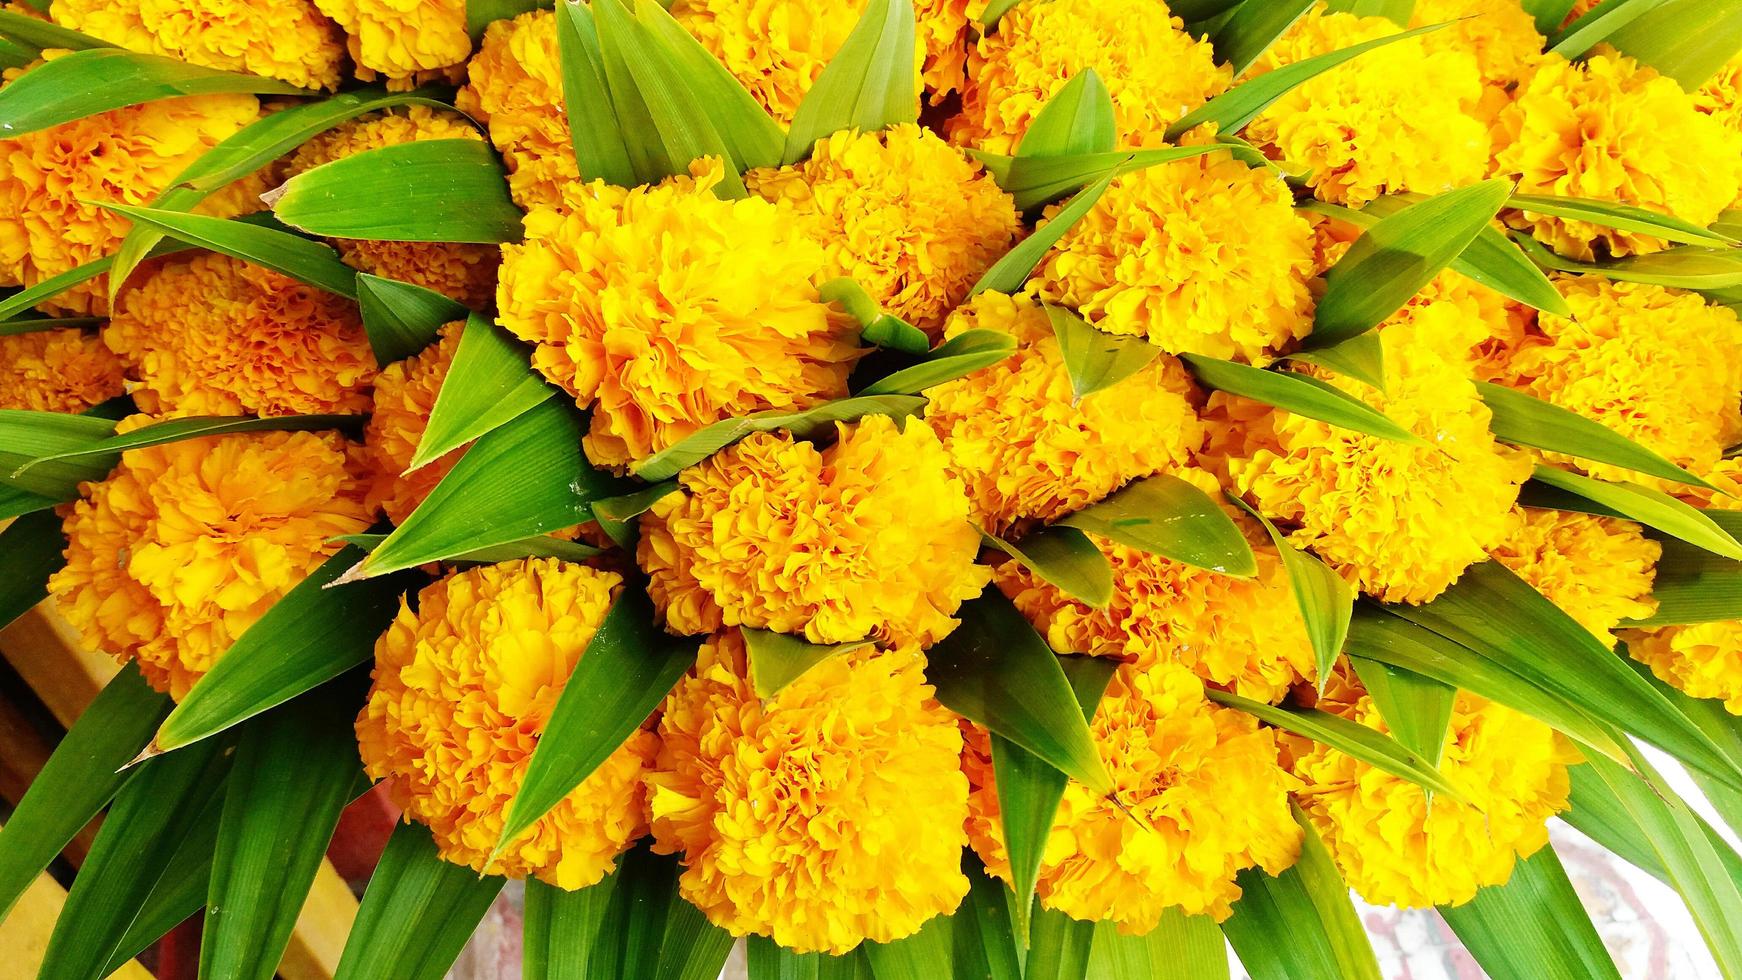 Colorful of many marigold flowers in garden. Beautiful yellow floral with leaves for background. photo